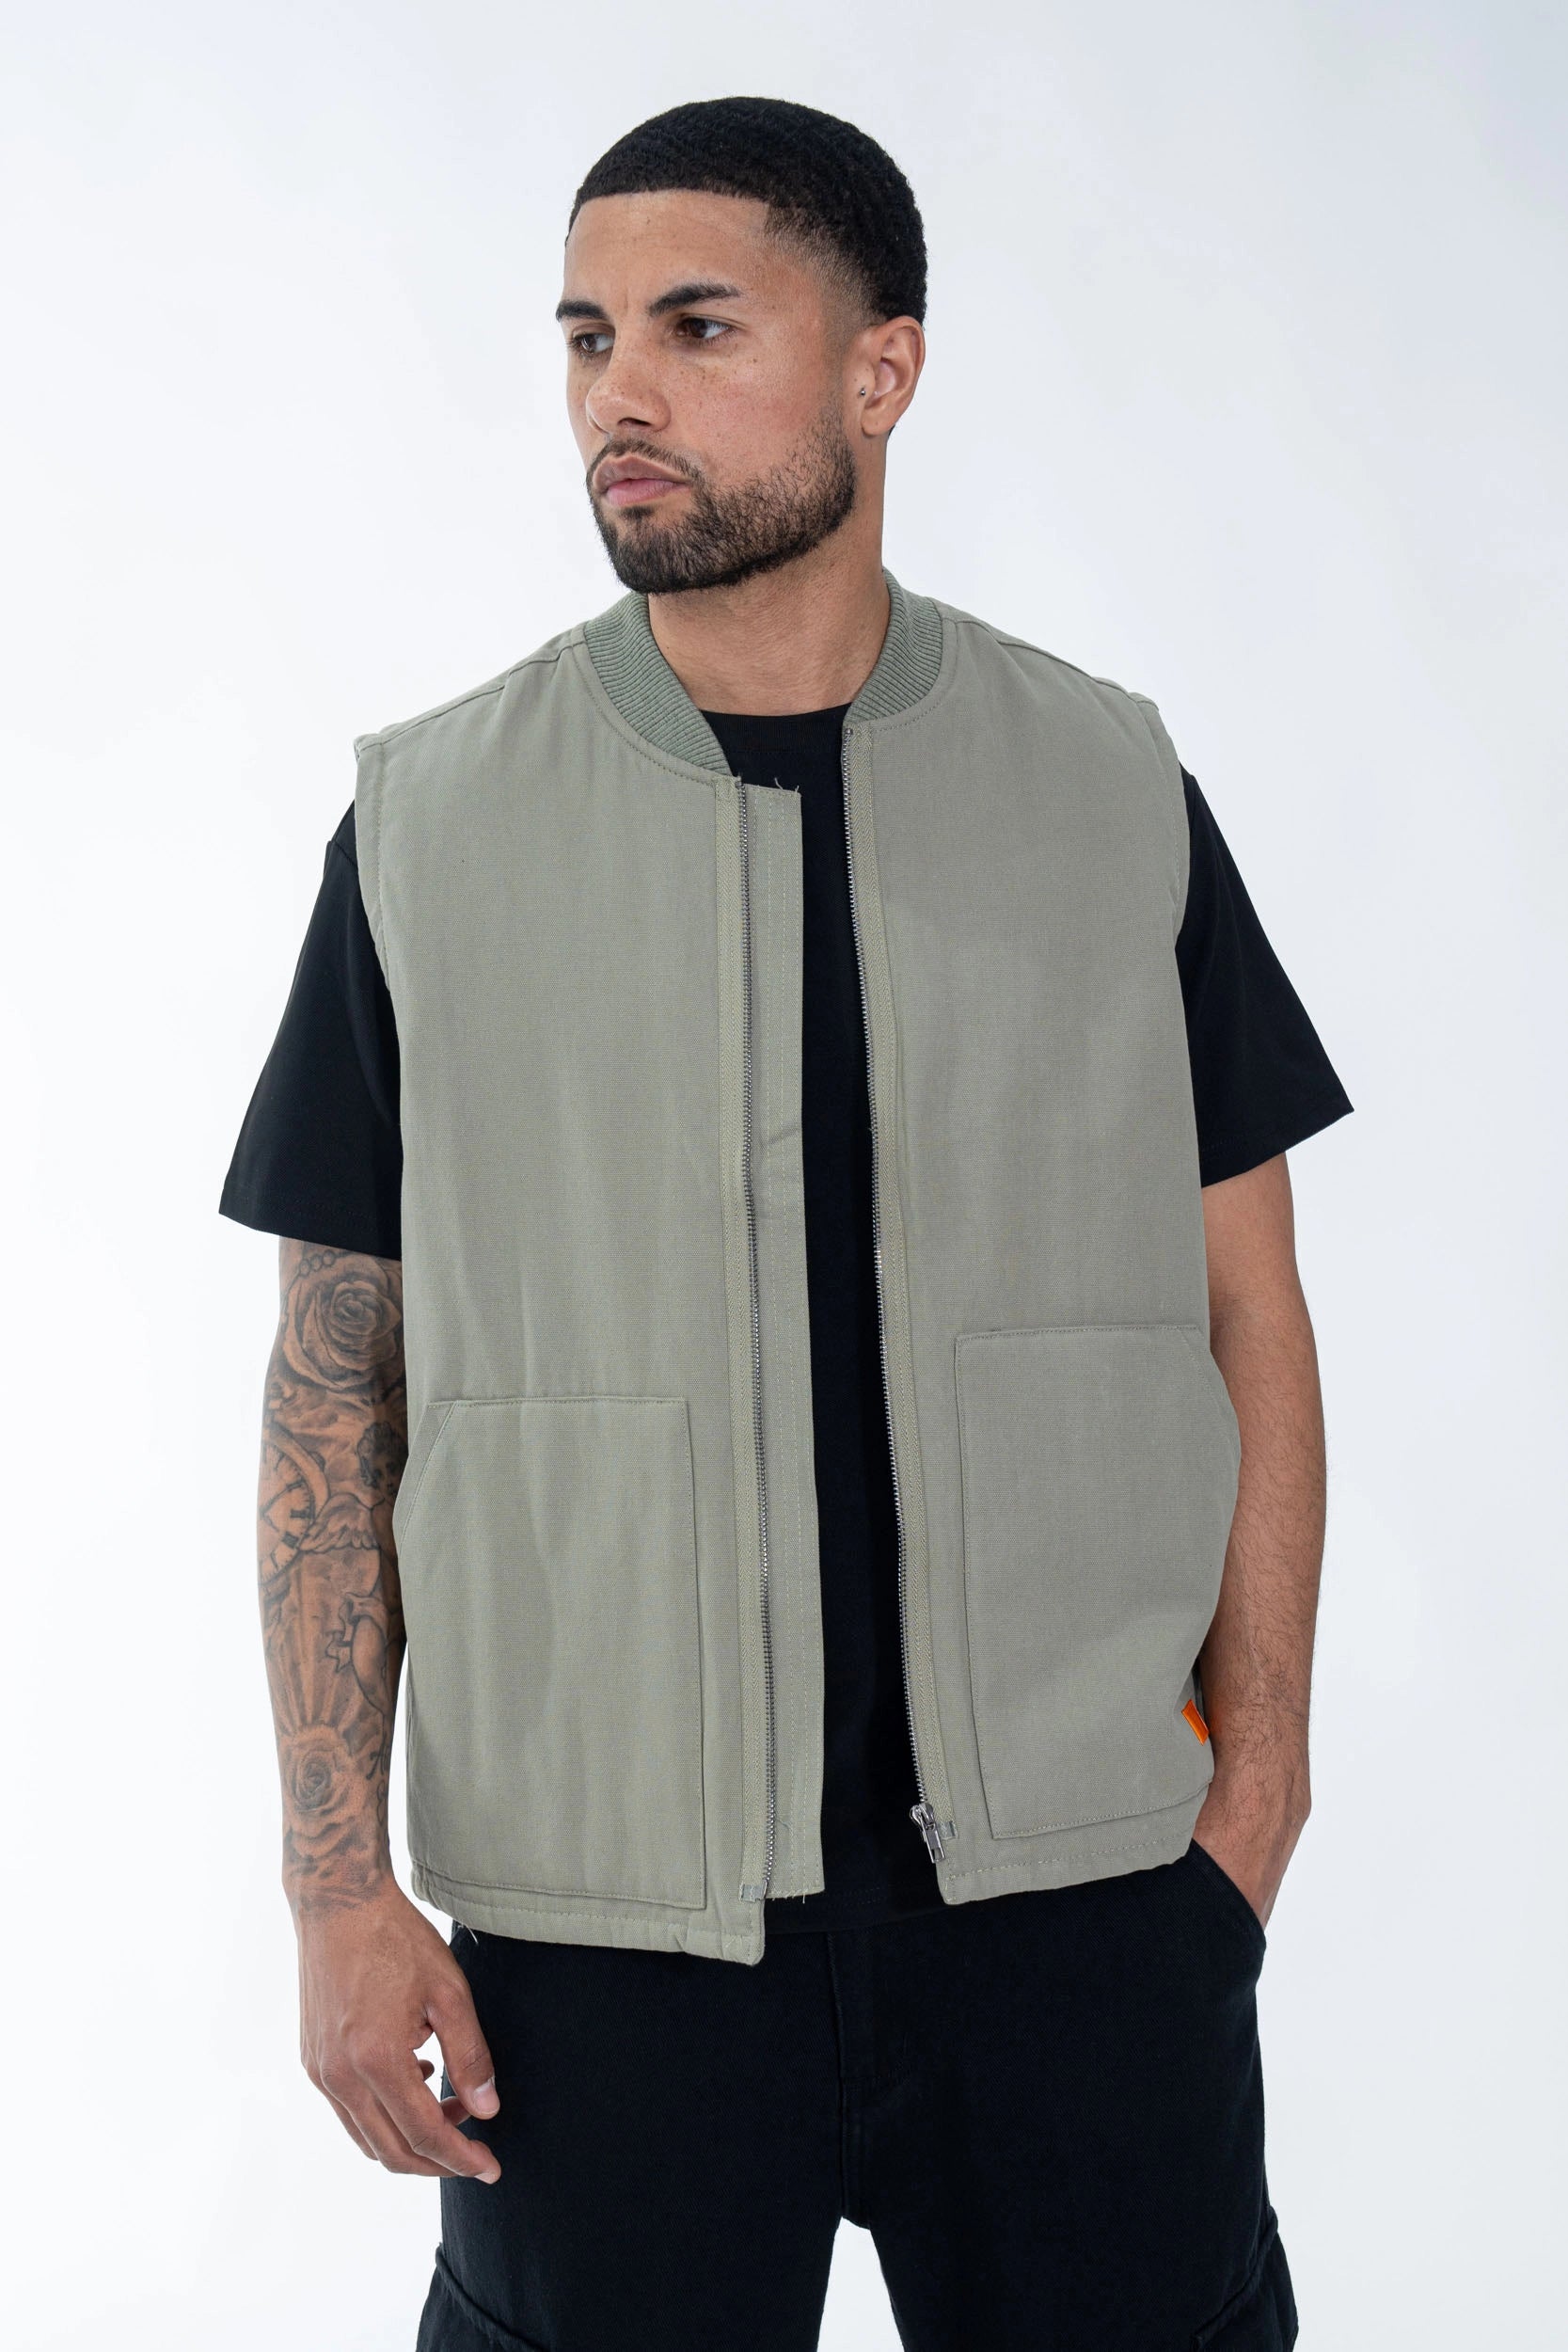 Sleeveless quilted vest